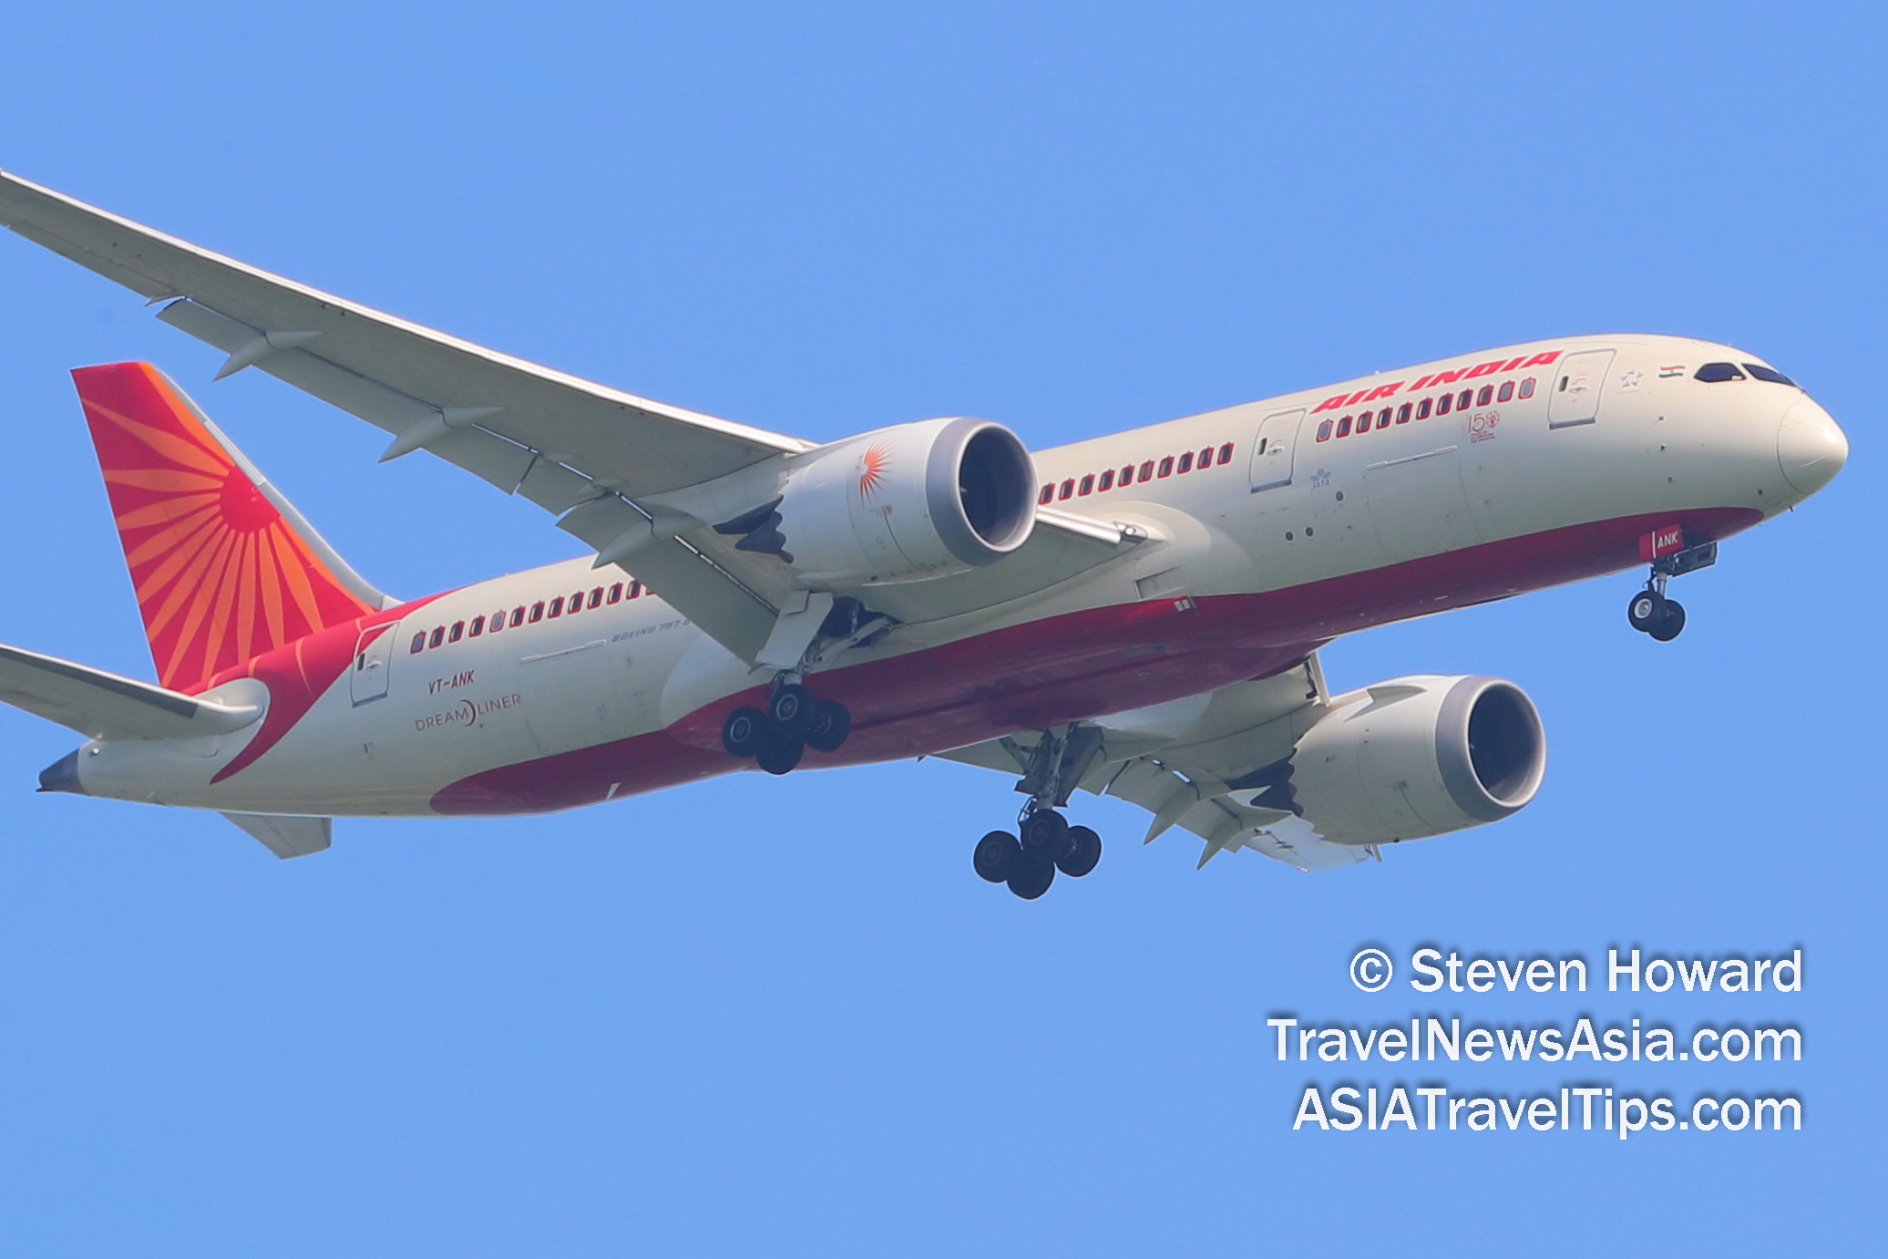 Air India B787-9 reg: VT-ANK. Picture by Steven Howard of TravelNewsAsia.com Click to enlarge.